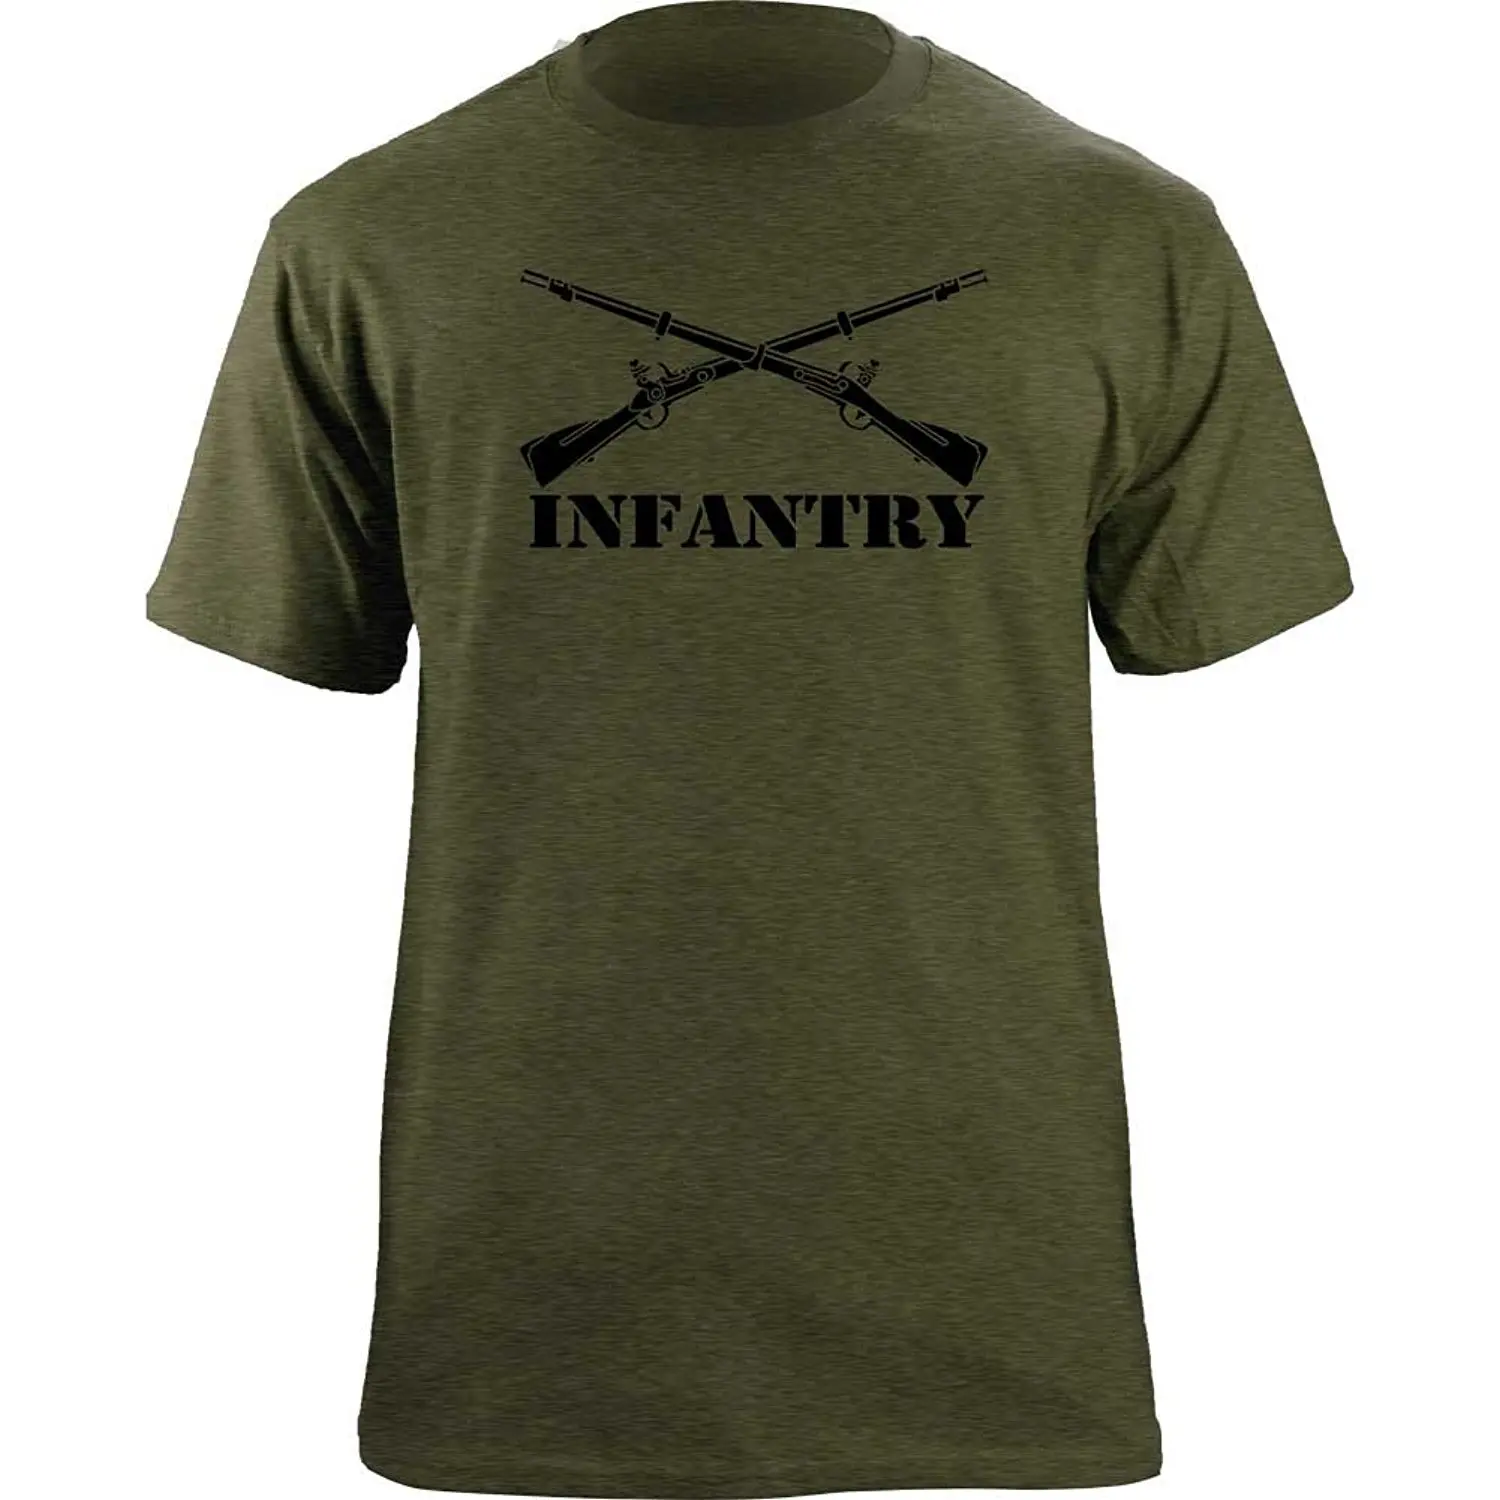 2019 New Summer Men Tee Shirt Army Infantry Branch Insignia Military ...